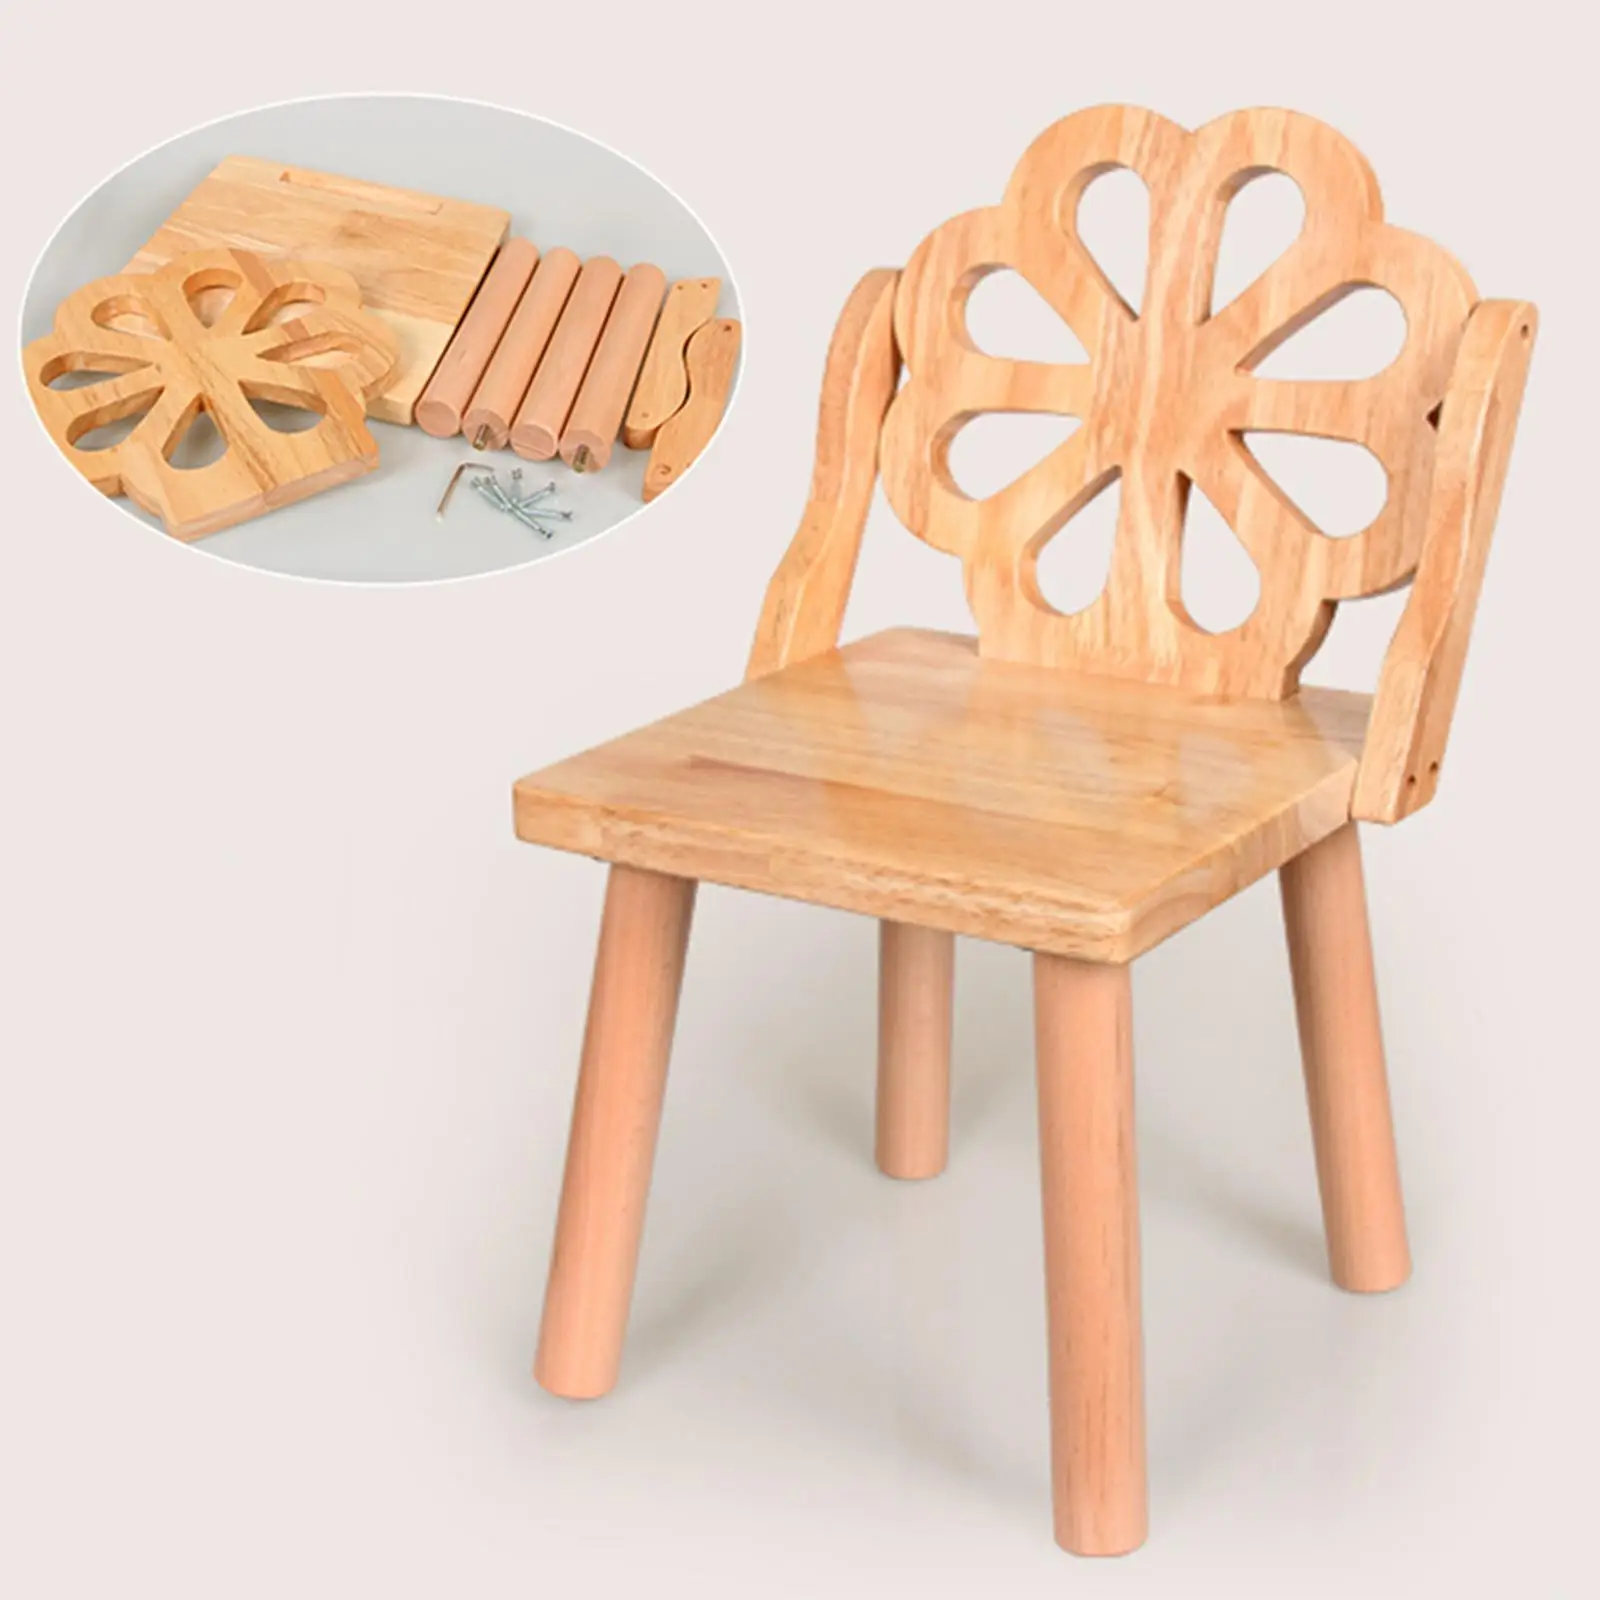 Wood Removable Wooden Child Stool Space Saving Ultralight Protable Wooden Kindergarten game Small Seat Stool for Kids